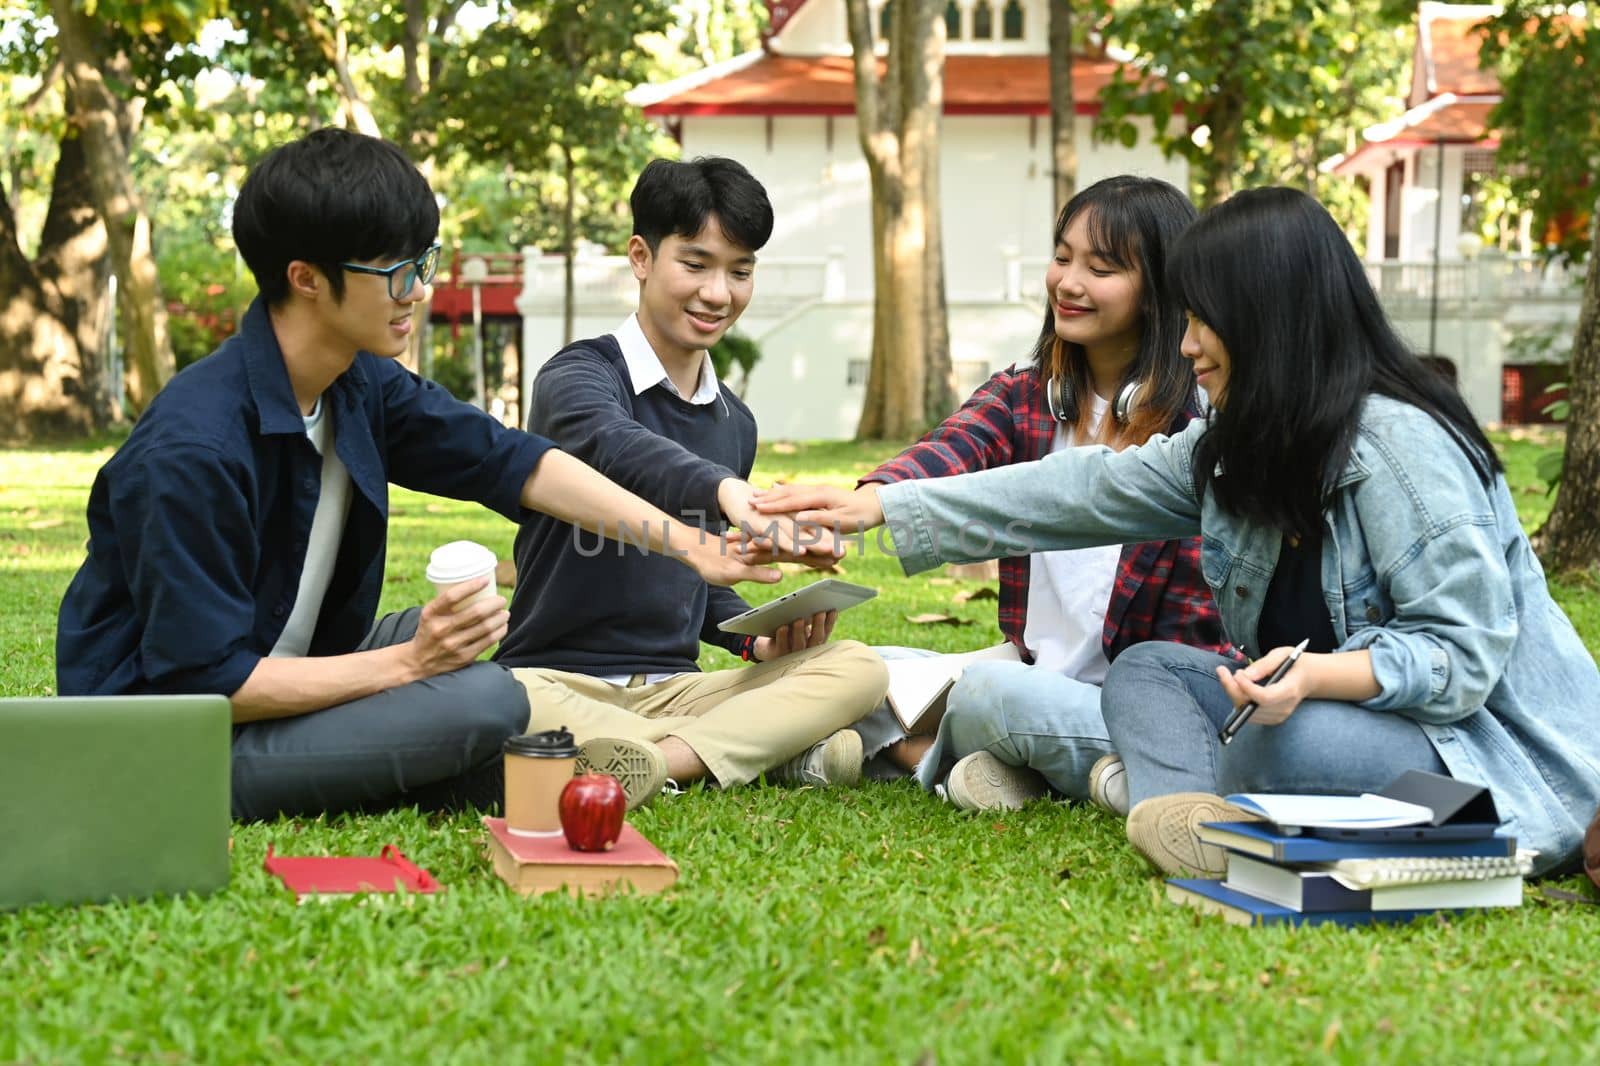 Happy university students stacking hands, celebrating together. University, youth lifestyle and friendship concept.